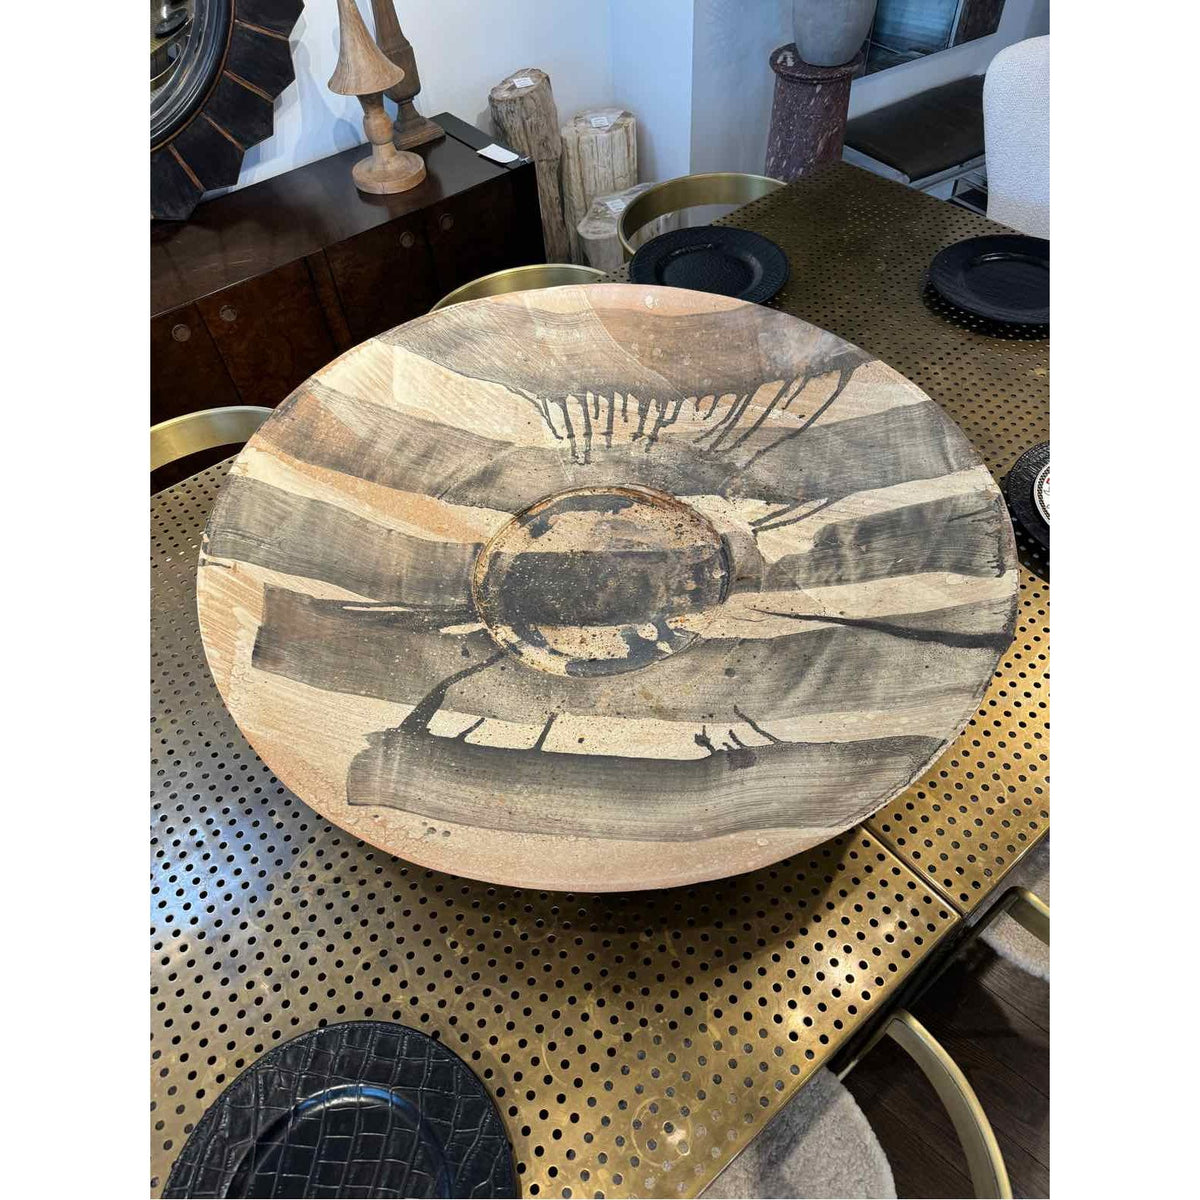 Large Ceramic Art Bowl on Table or Wall